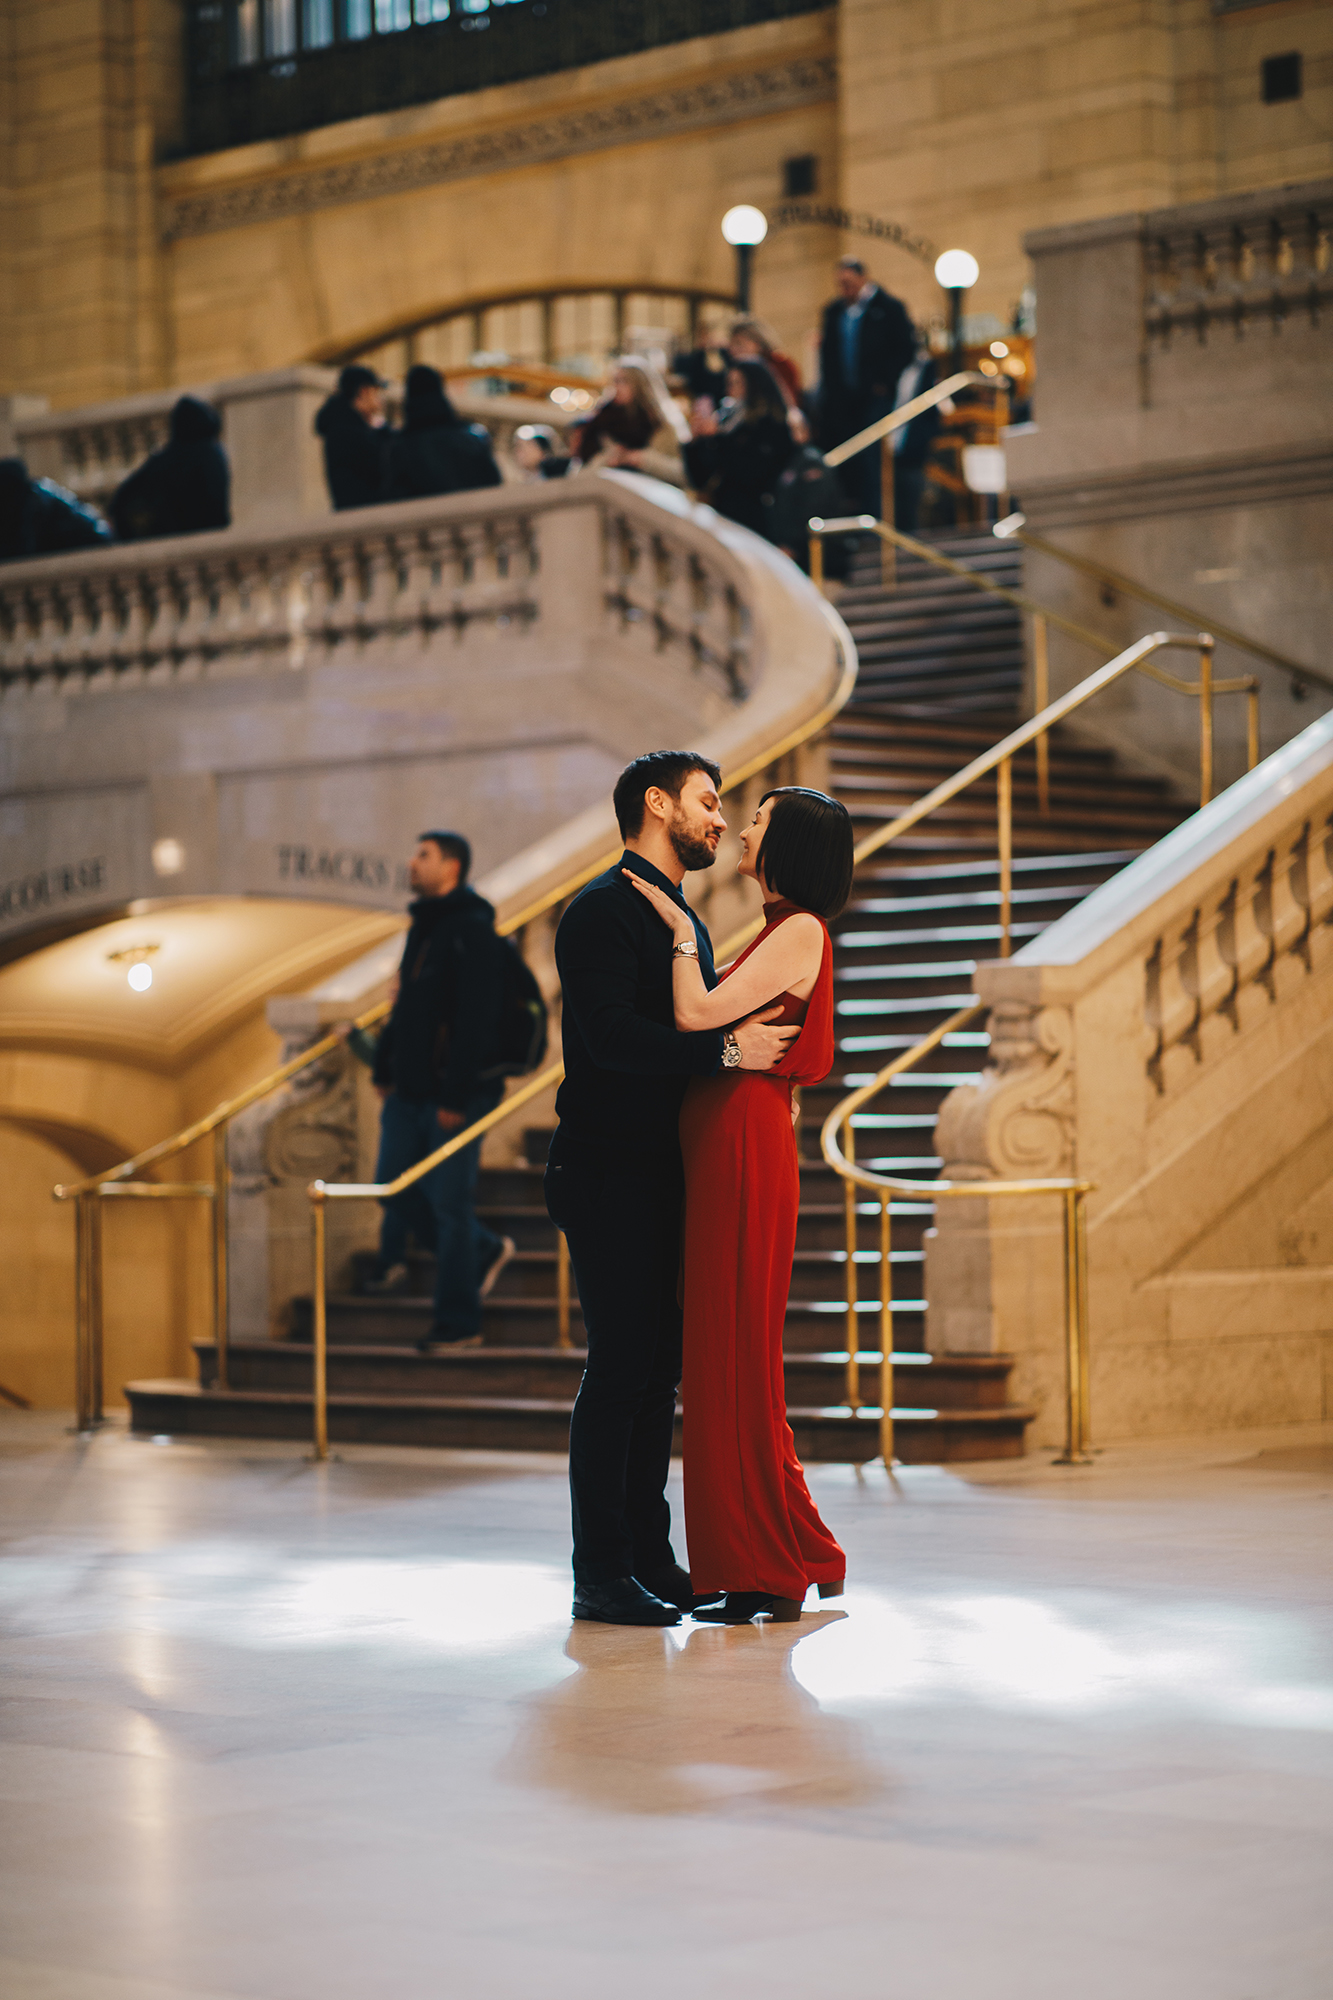 Romantic Times Square Engagement Photos and Grand Central Engagement Photography in NYC